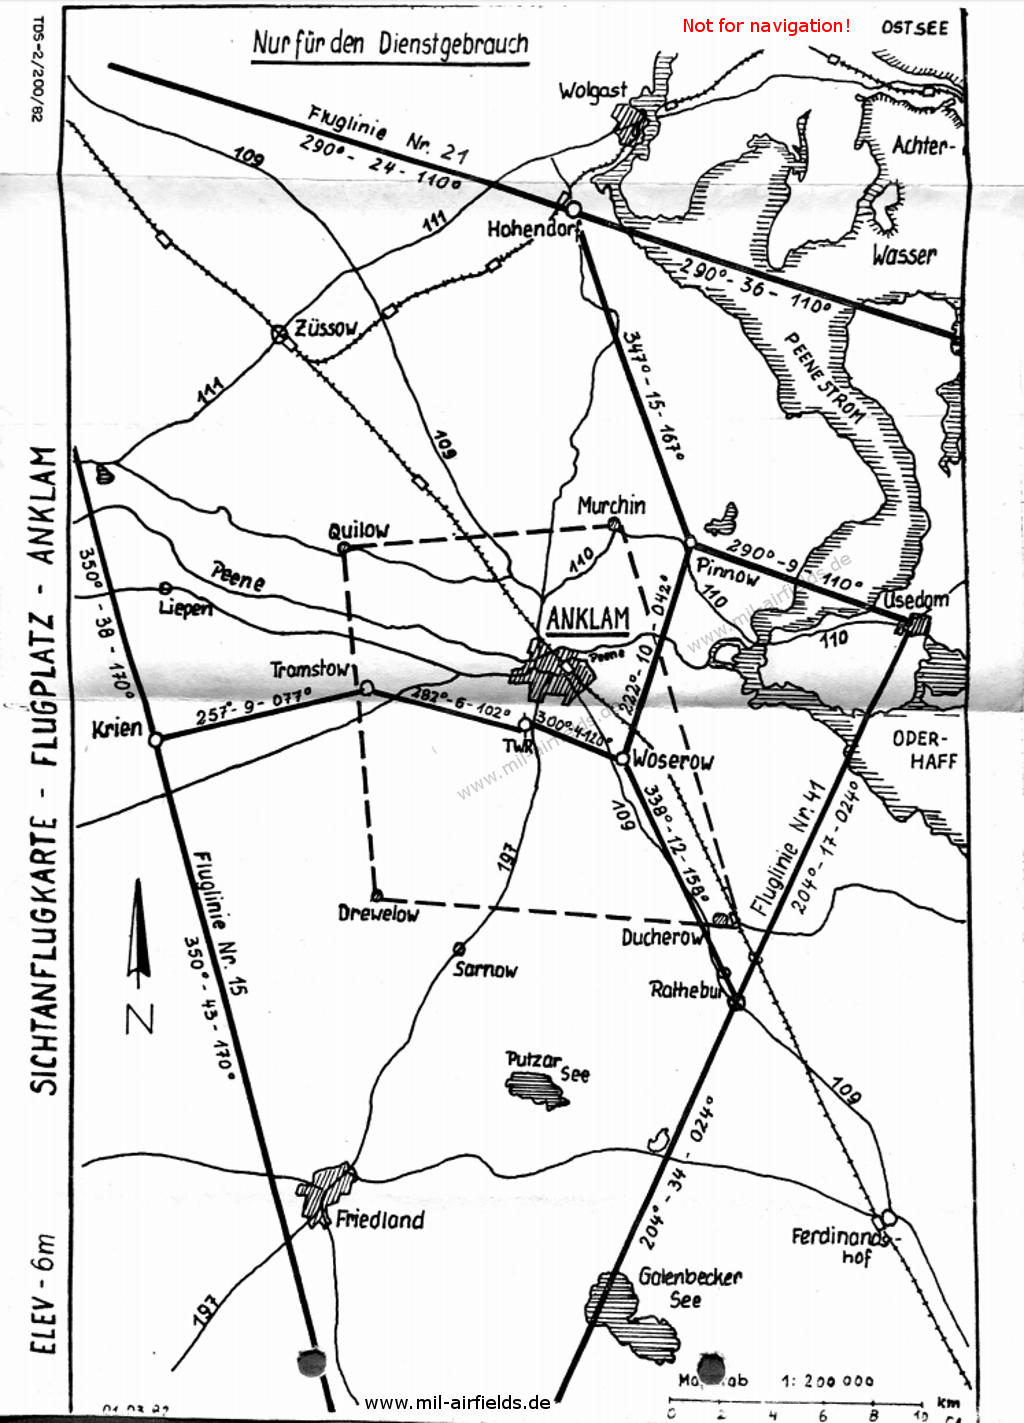 Approaches from the Local Flying Routes in 1982